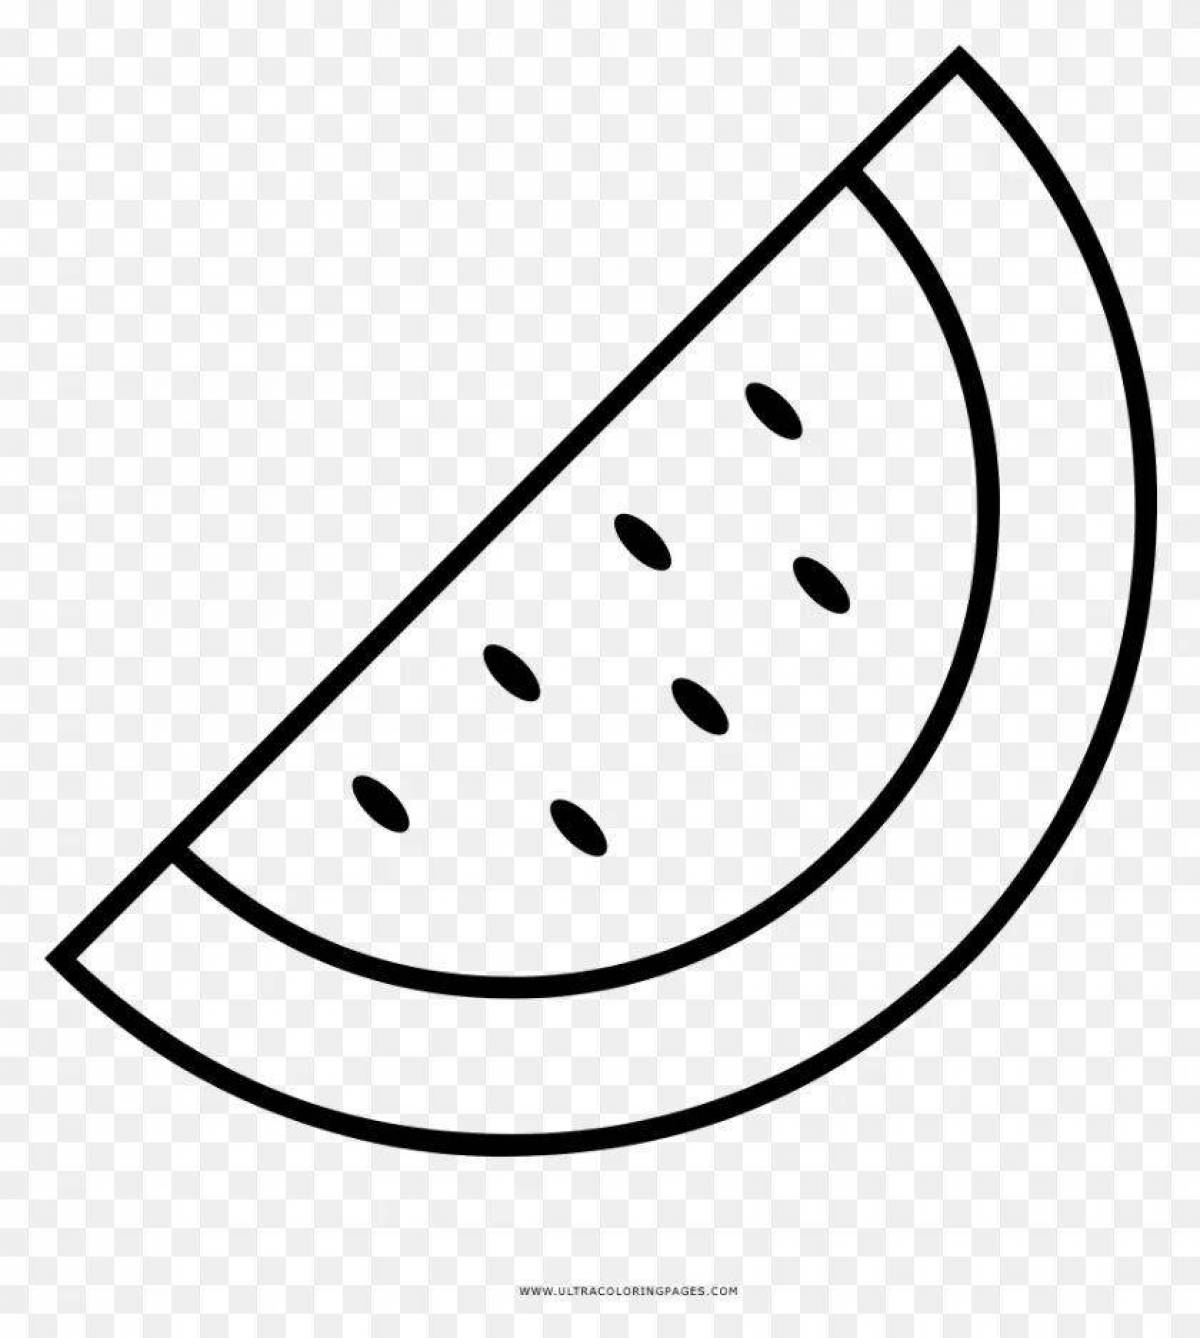 Coloring page playful slice of watermelon